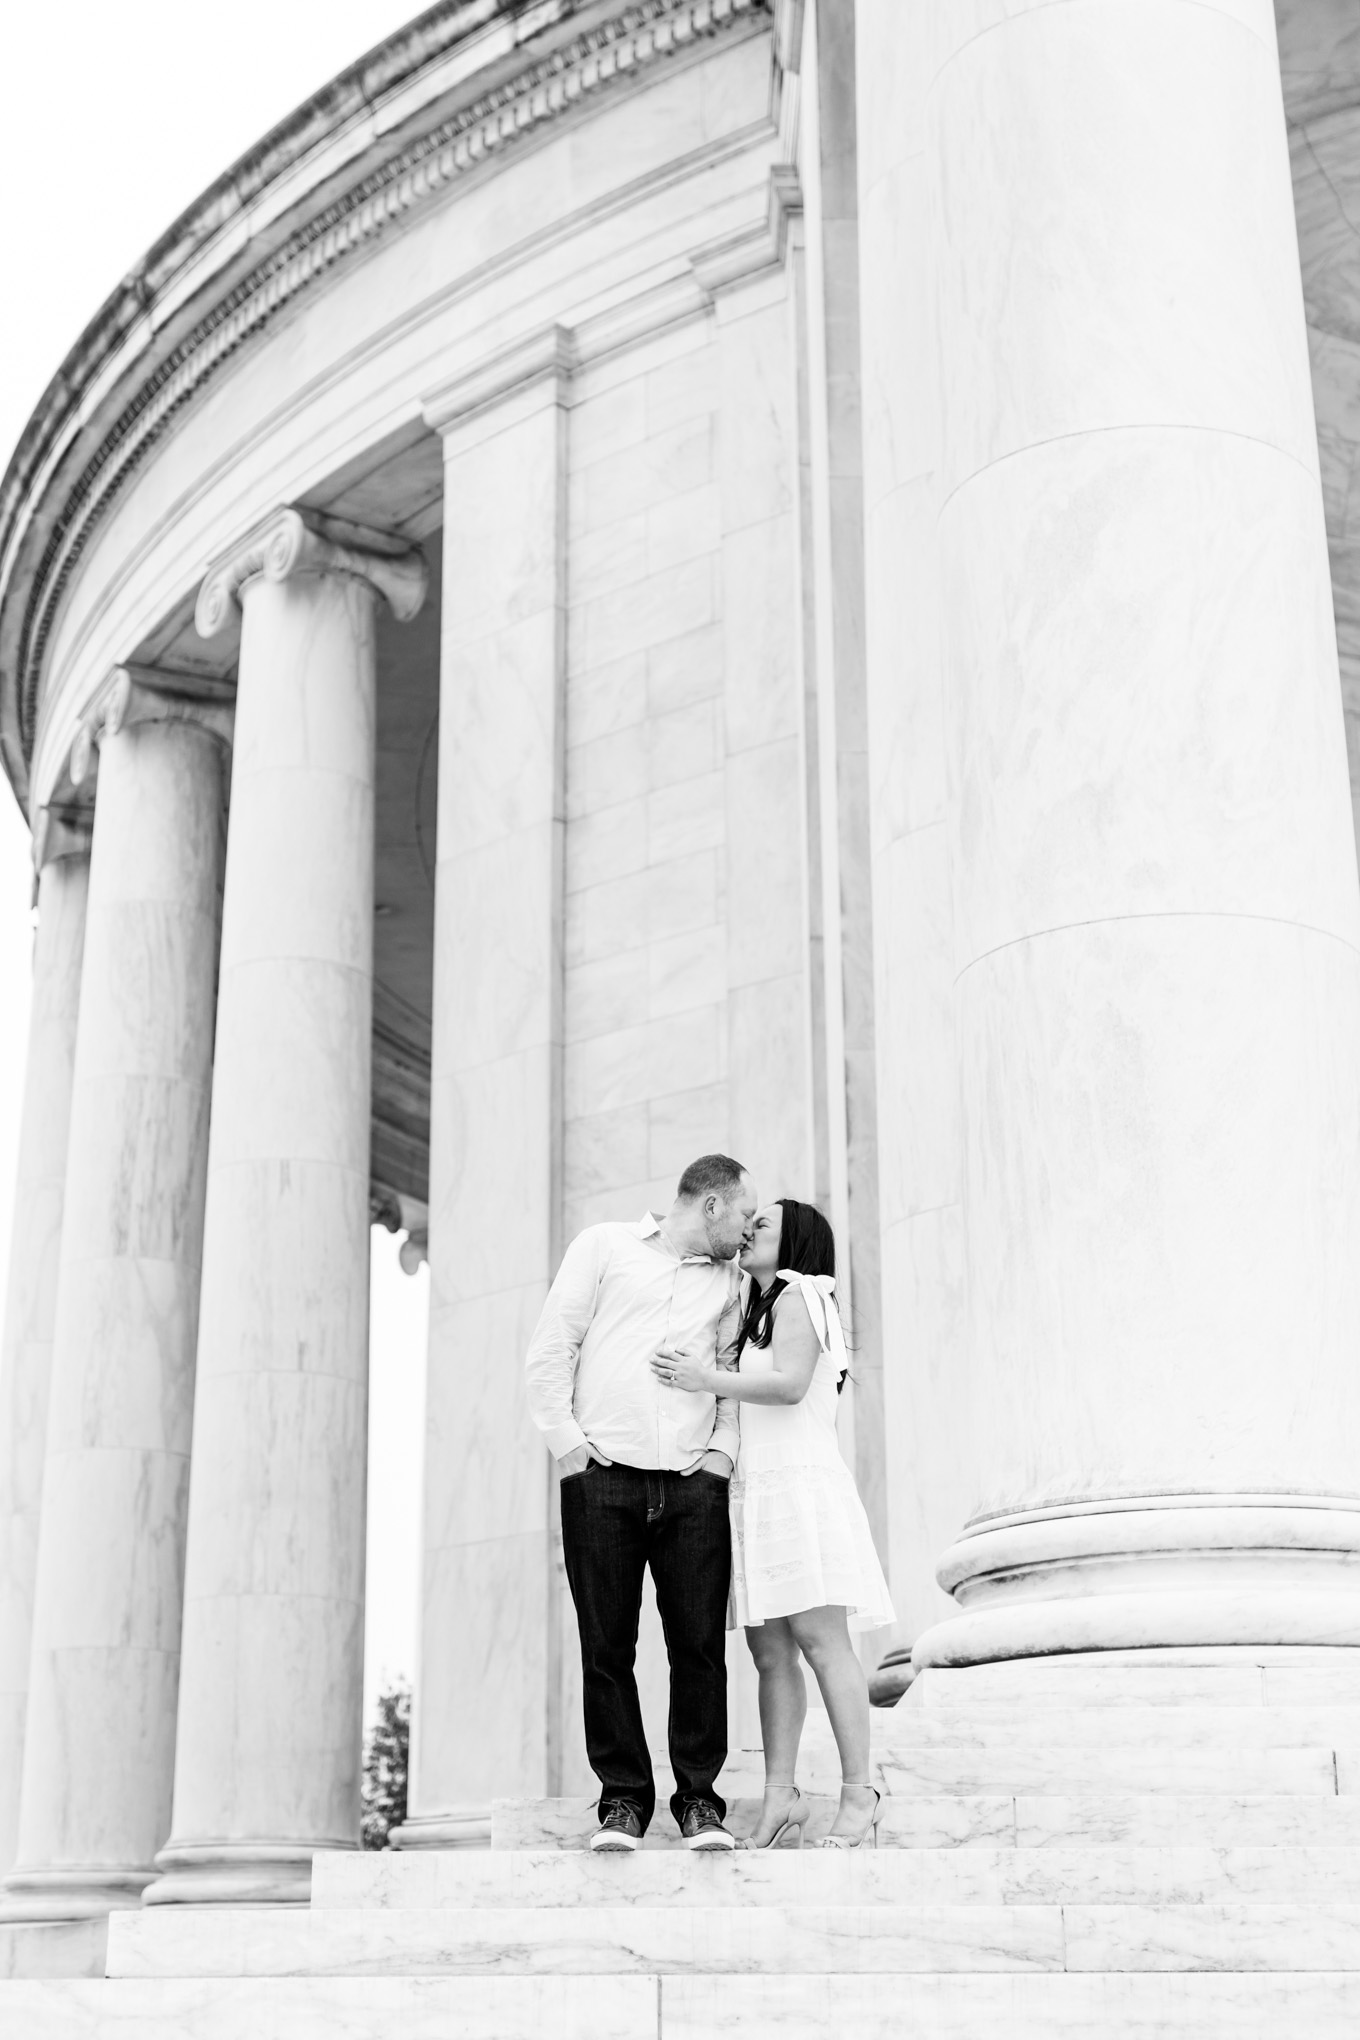 engaged couple, engagement portraits, photo shoot outfit ideas, cherry blossom engagement portraits, cherry blossom portraits, cherry blossoms, DC cherry blossoms, tidal basin, DC tidal basin, white cotton dress, white cotton sleeveless dress, bow sleeves, classic cherry blossom engagement session, Jefferson Memorial, Jefferson Memorial engagement photos, black and white photo, black and white engagement photo, D.C. engagement photographer